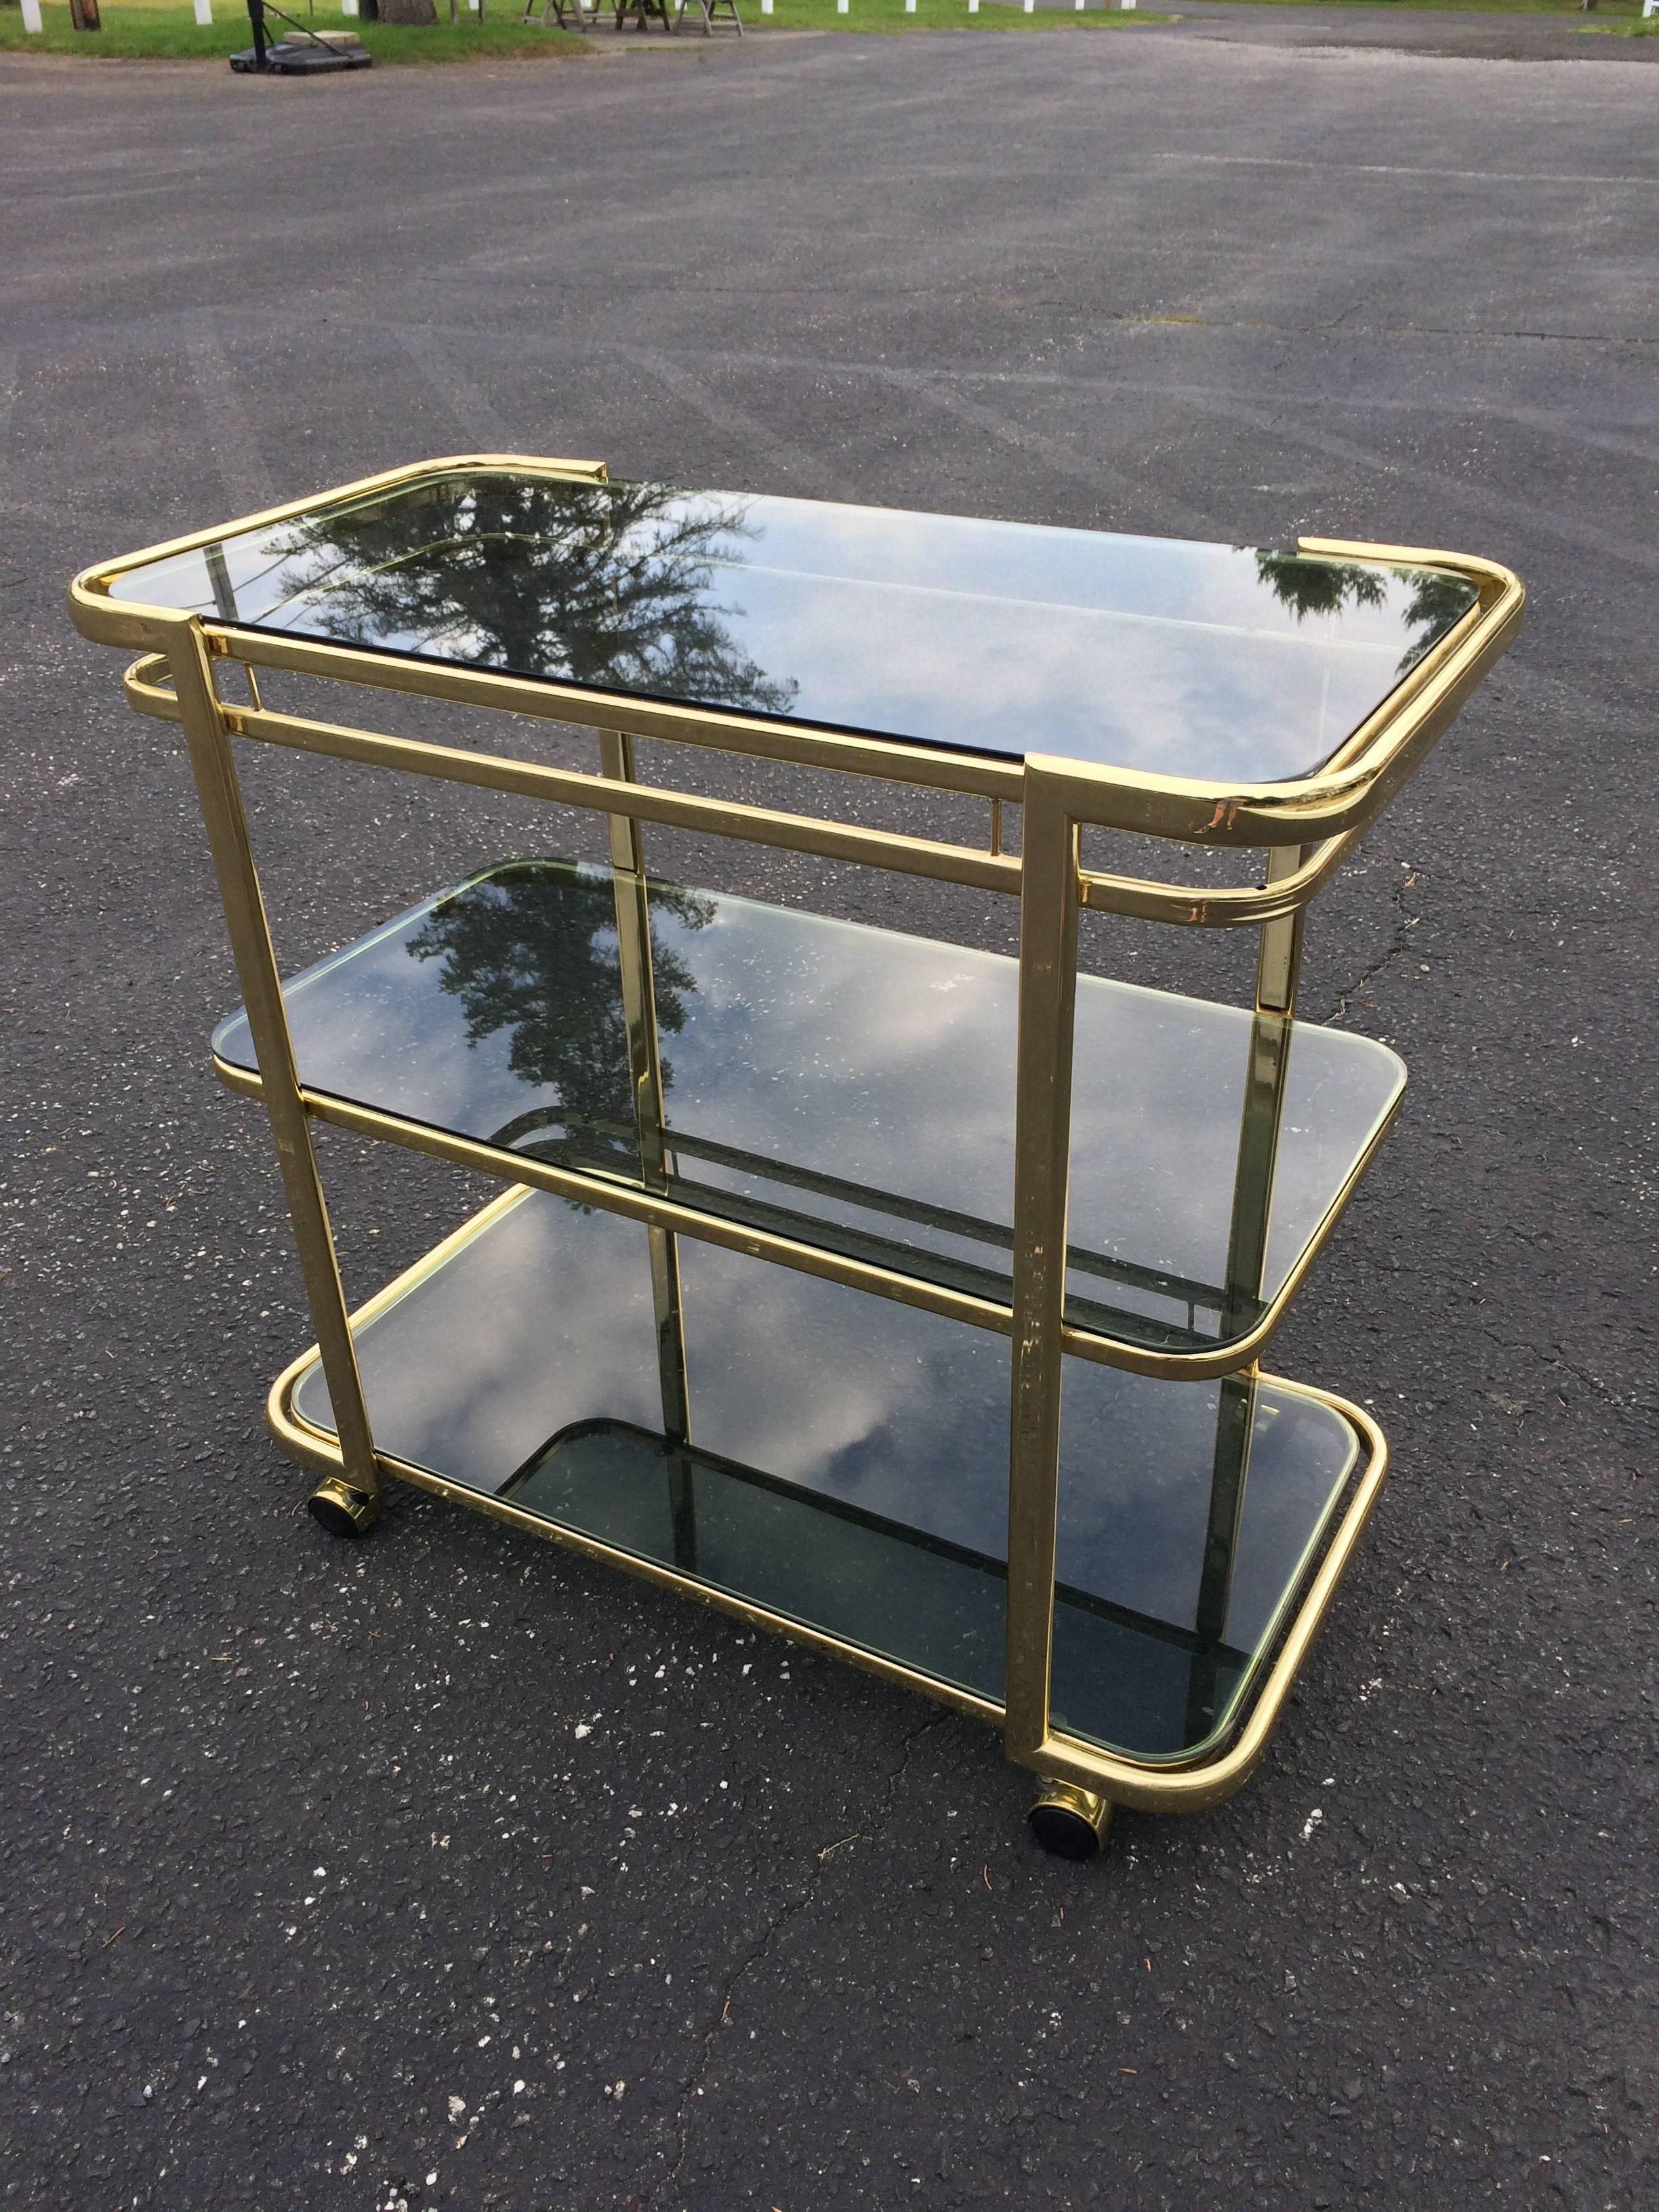 Brass and smoked glass bar cart. Sleek minimalist lines make up this beauty. The smoked Glass gives it an added sexiness and contrasts well with the polished brass. Three shelves allow for ample serving space for glasses and bottles or dessert and